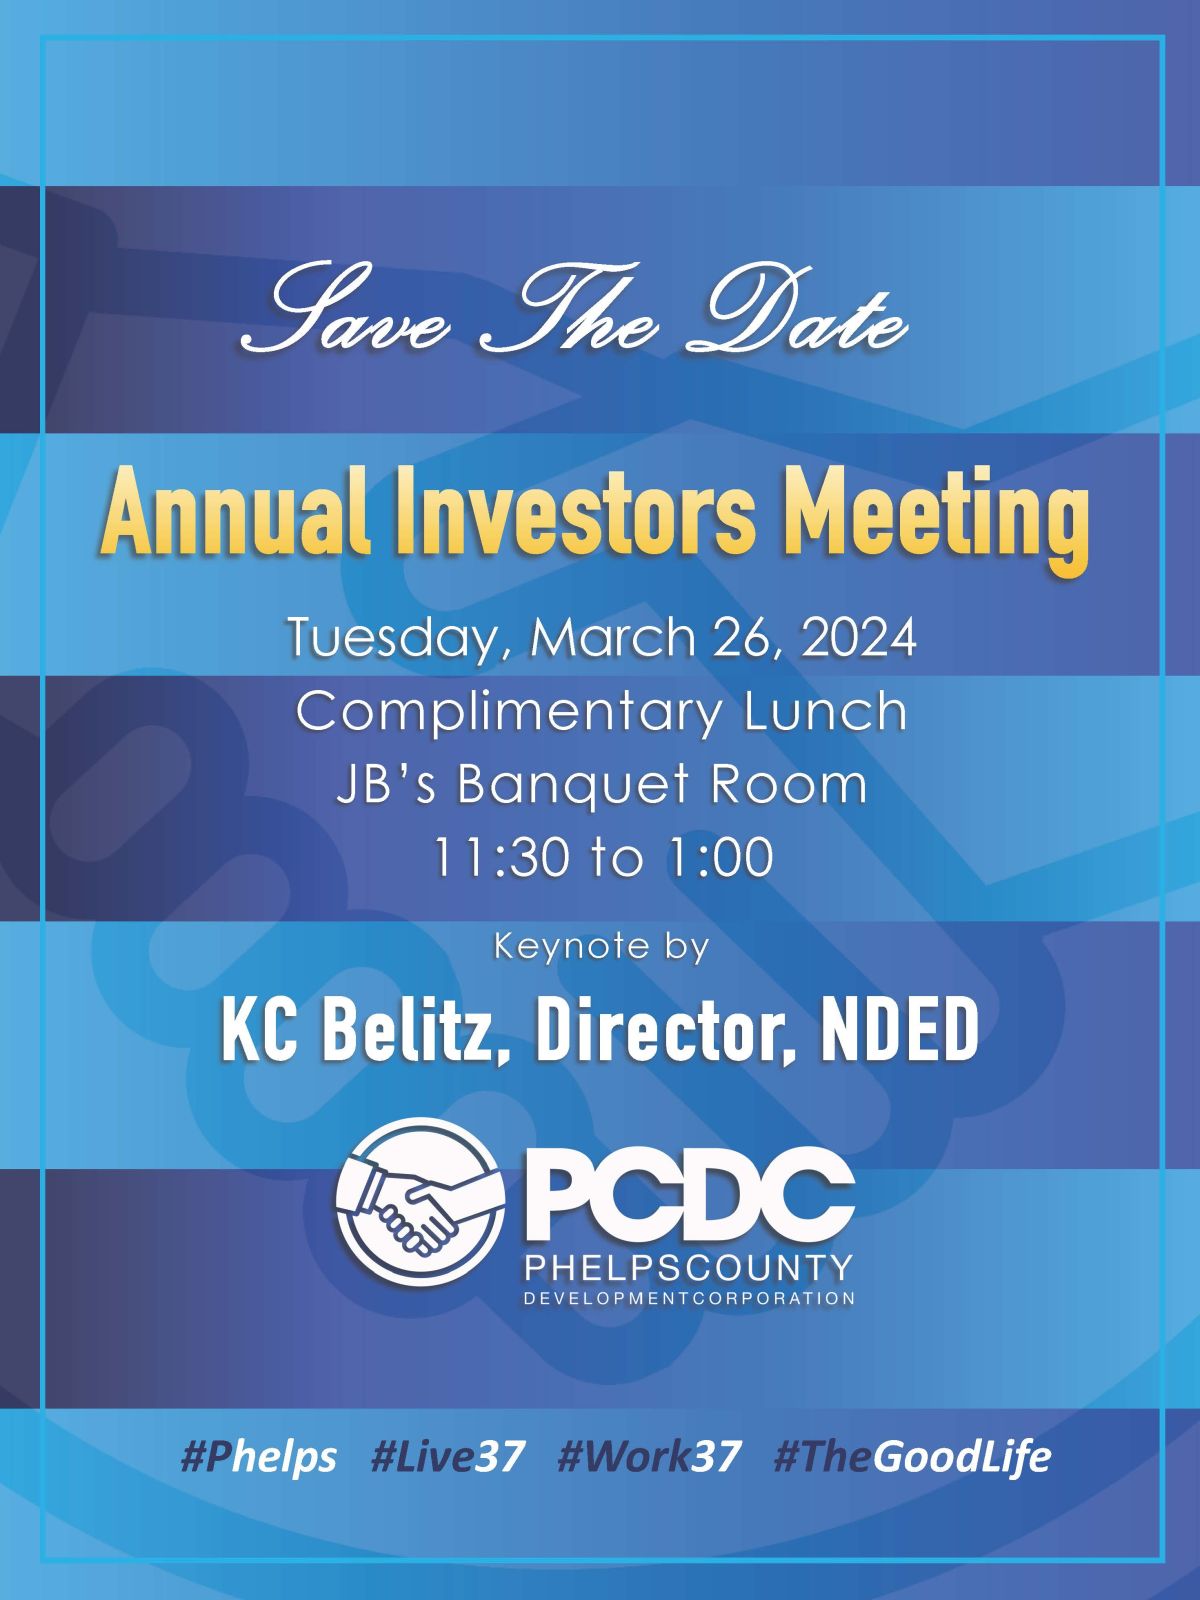 Holdrege Welcomes NDED Director For PCDC Annual Meeting Photo